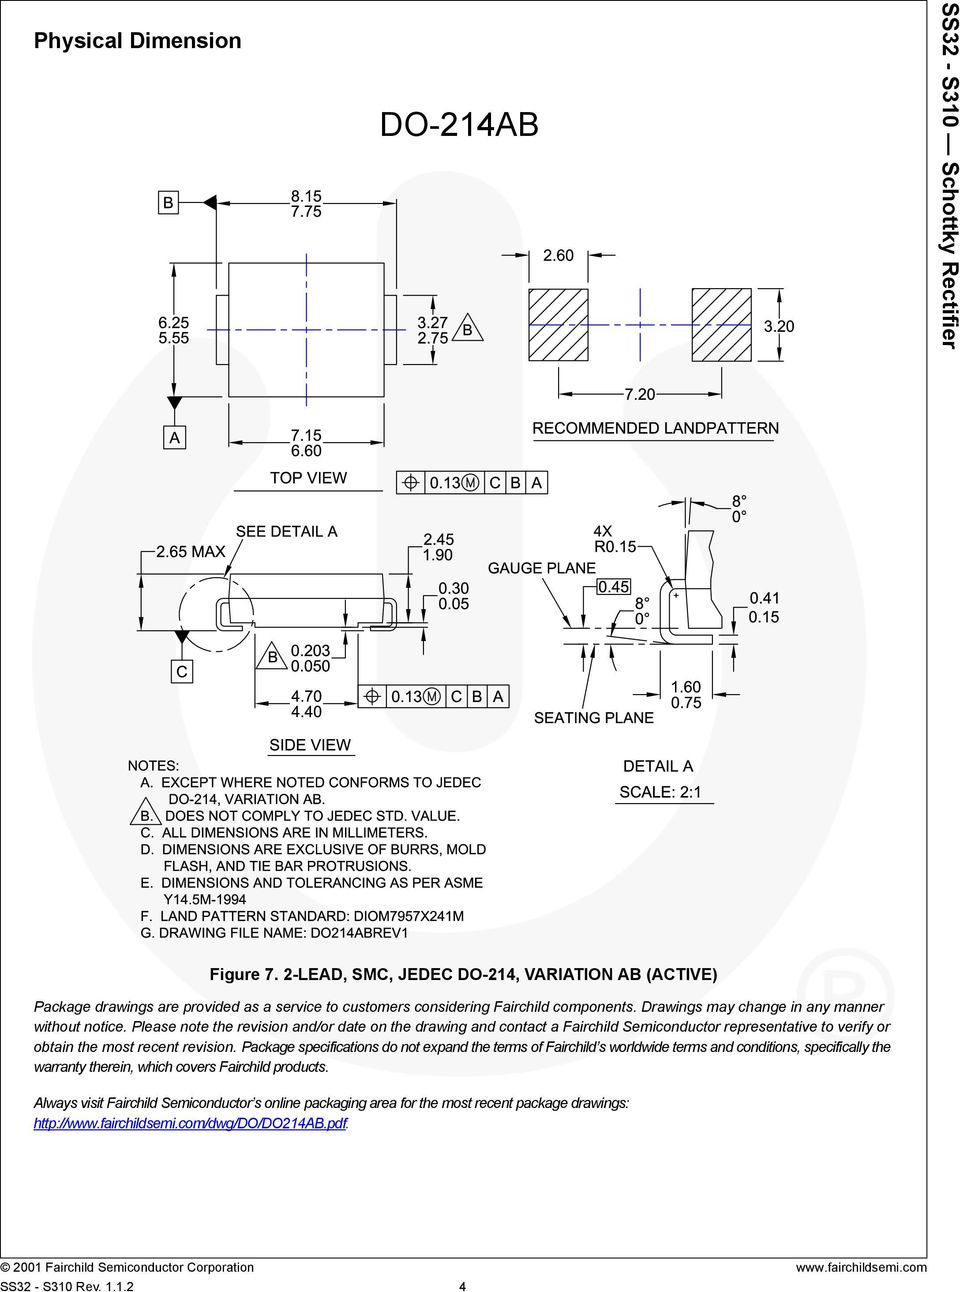 Please note the revision and/or date on the drawing and contact a Fairchild Semiconductor representative to verify or obtain the most recent revision.